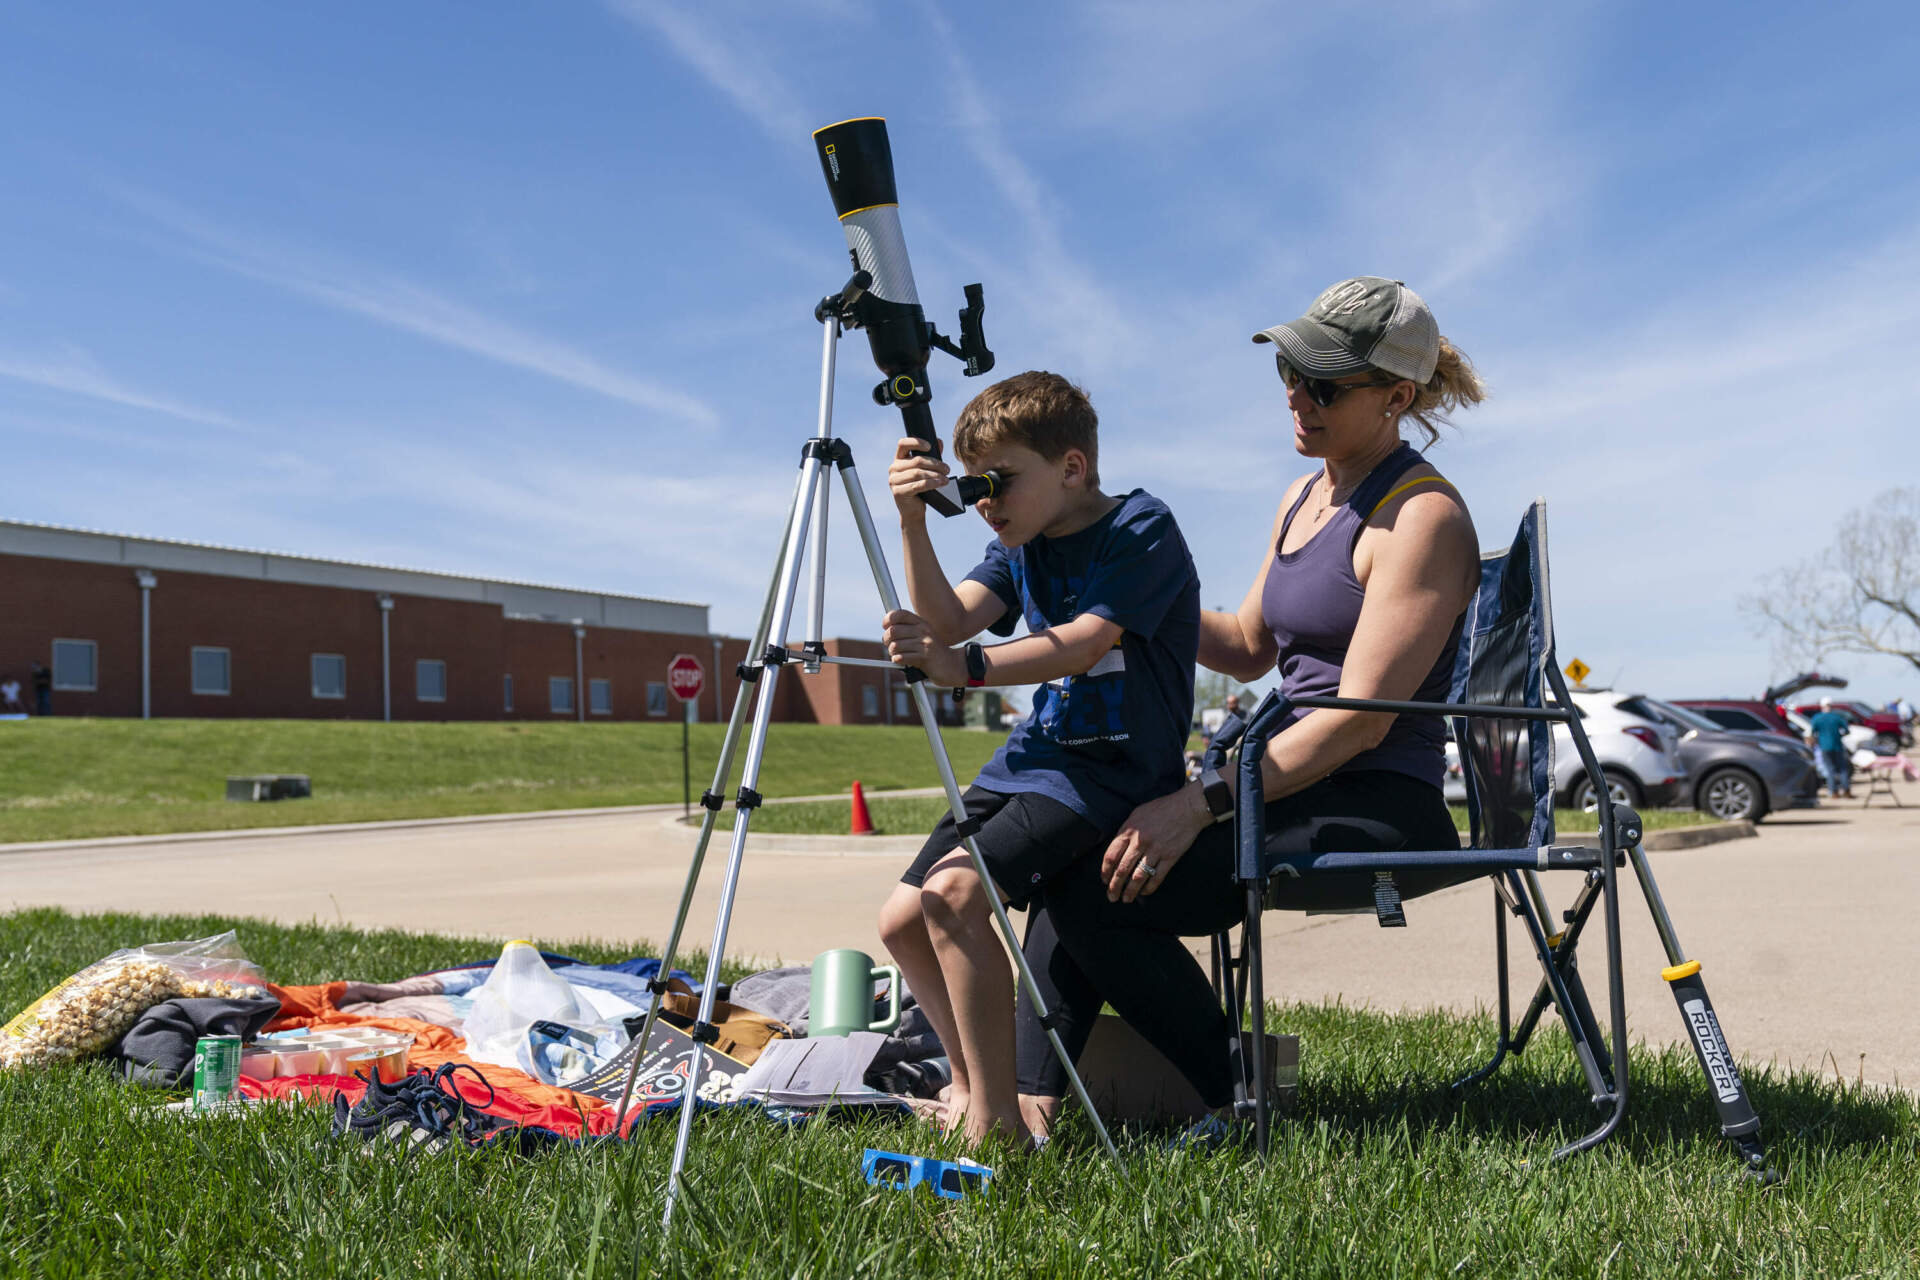 Anne Flanagan, 41, helps her son, Patrick Flanagan, 8, as they look for the sun through a telescope during an event for the solar eclipse. (Eric Lee/STLPR)